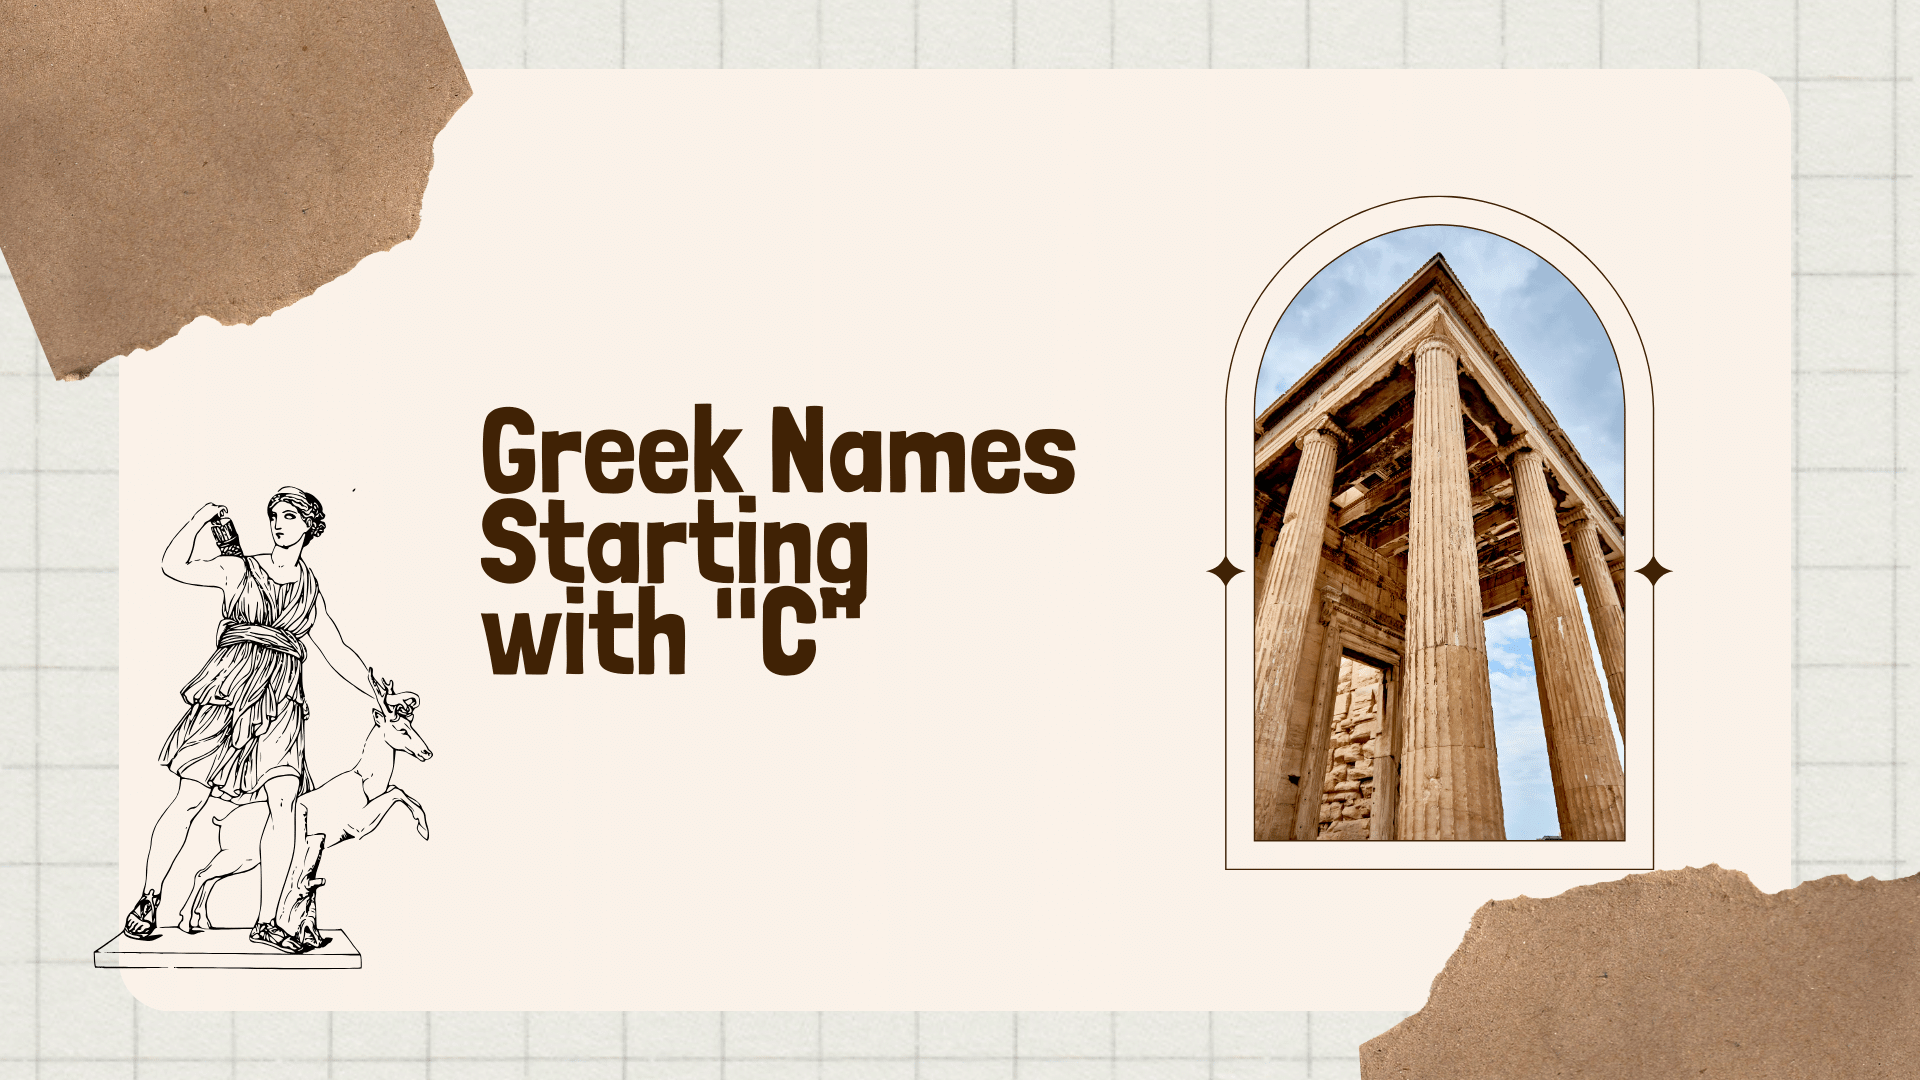 Greek Letters Starting With "C"